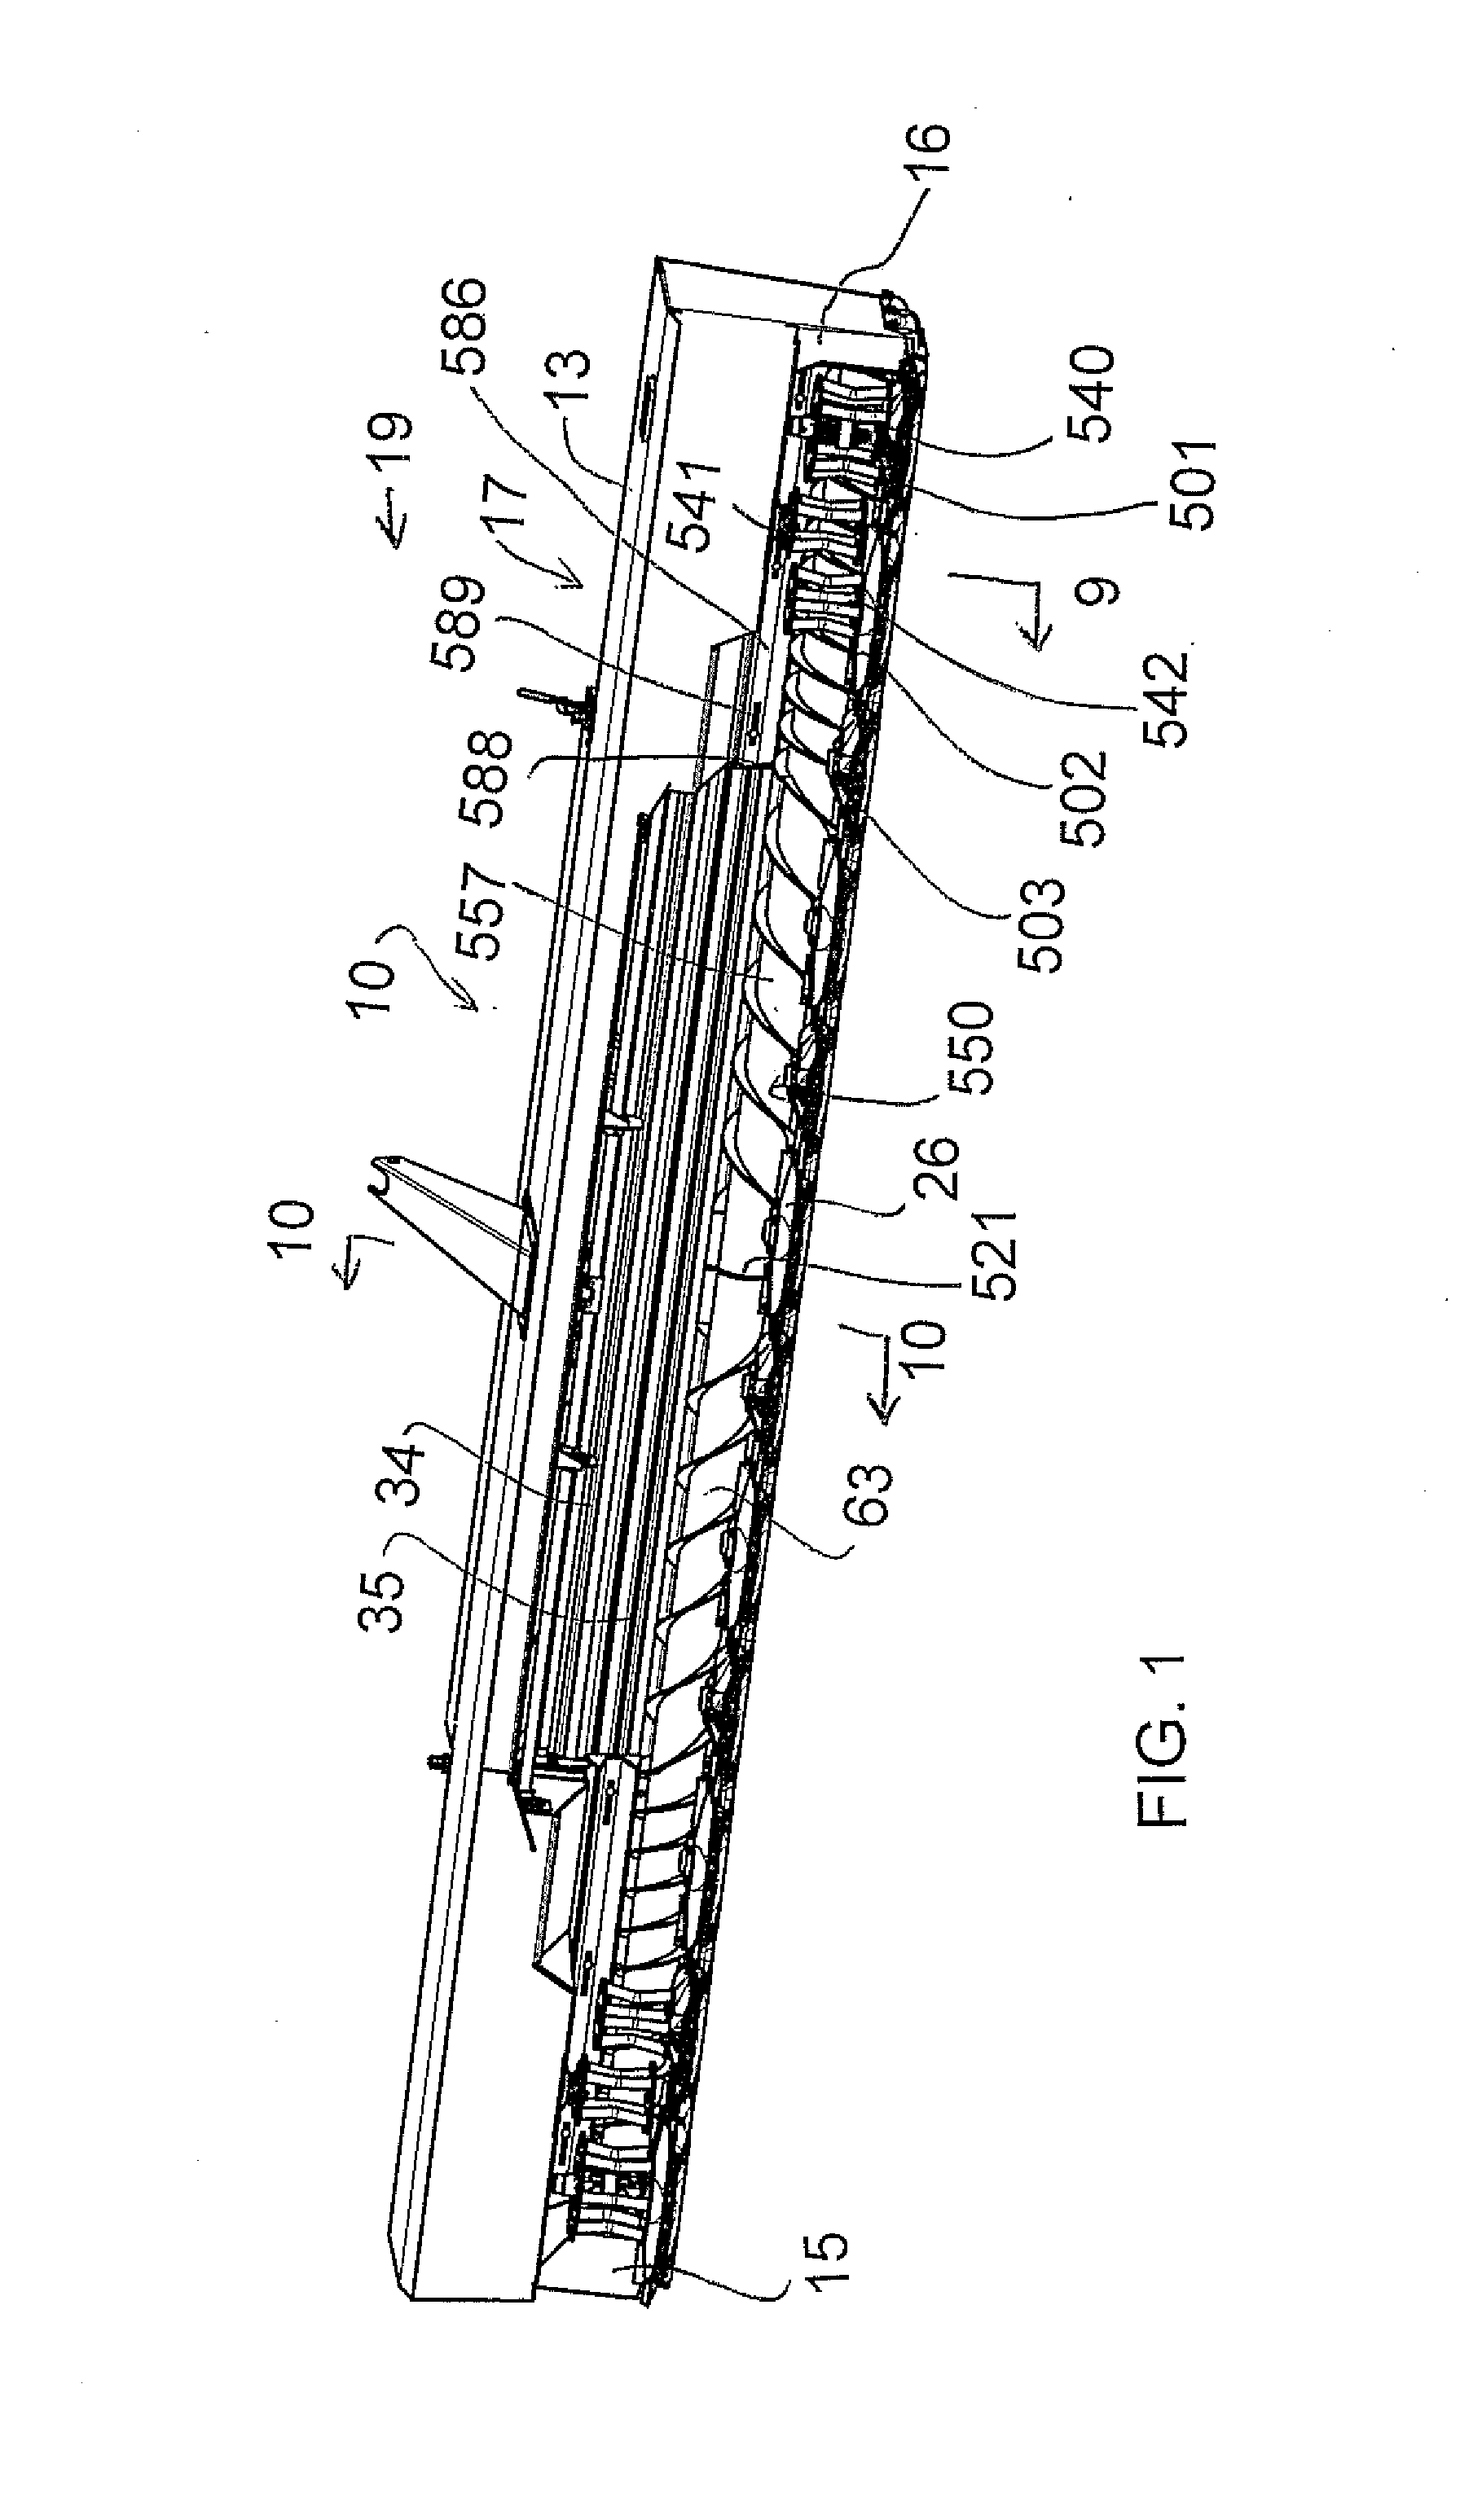 Rotary disk crop harvesting header with an auger for transferring the crop